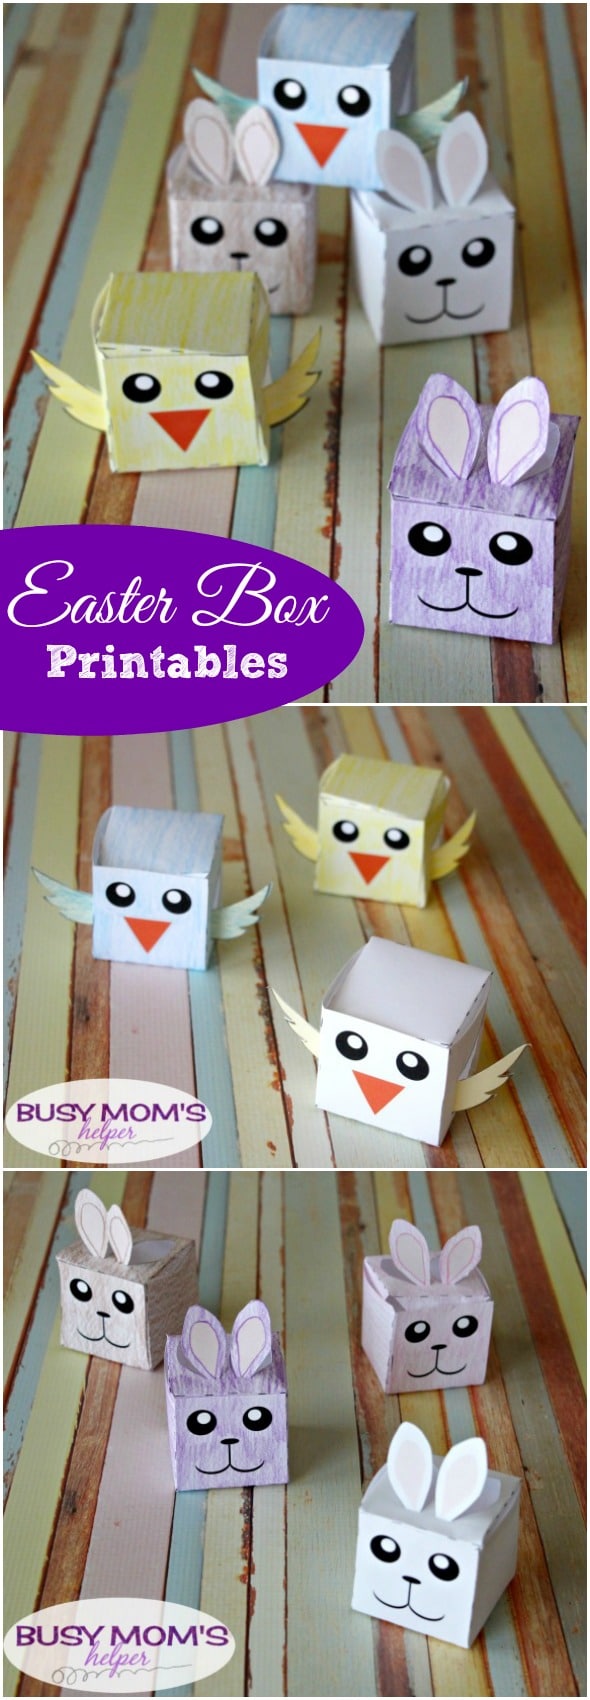 Easter Box Printables - a fun Easter gift or craft idea!